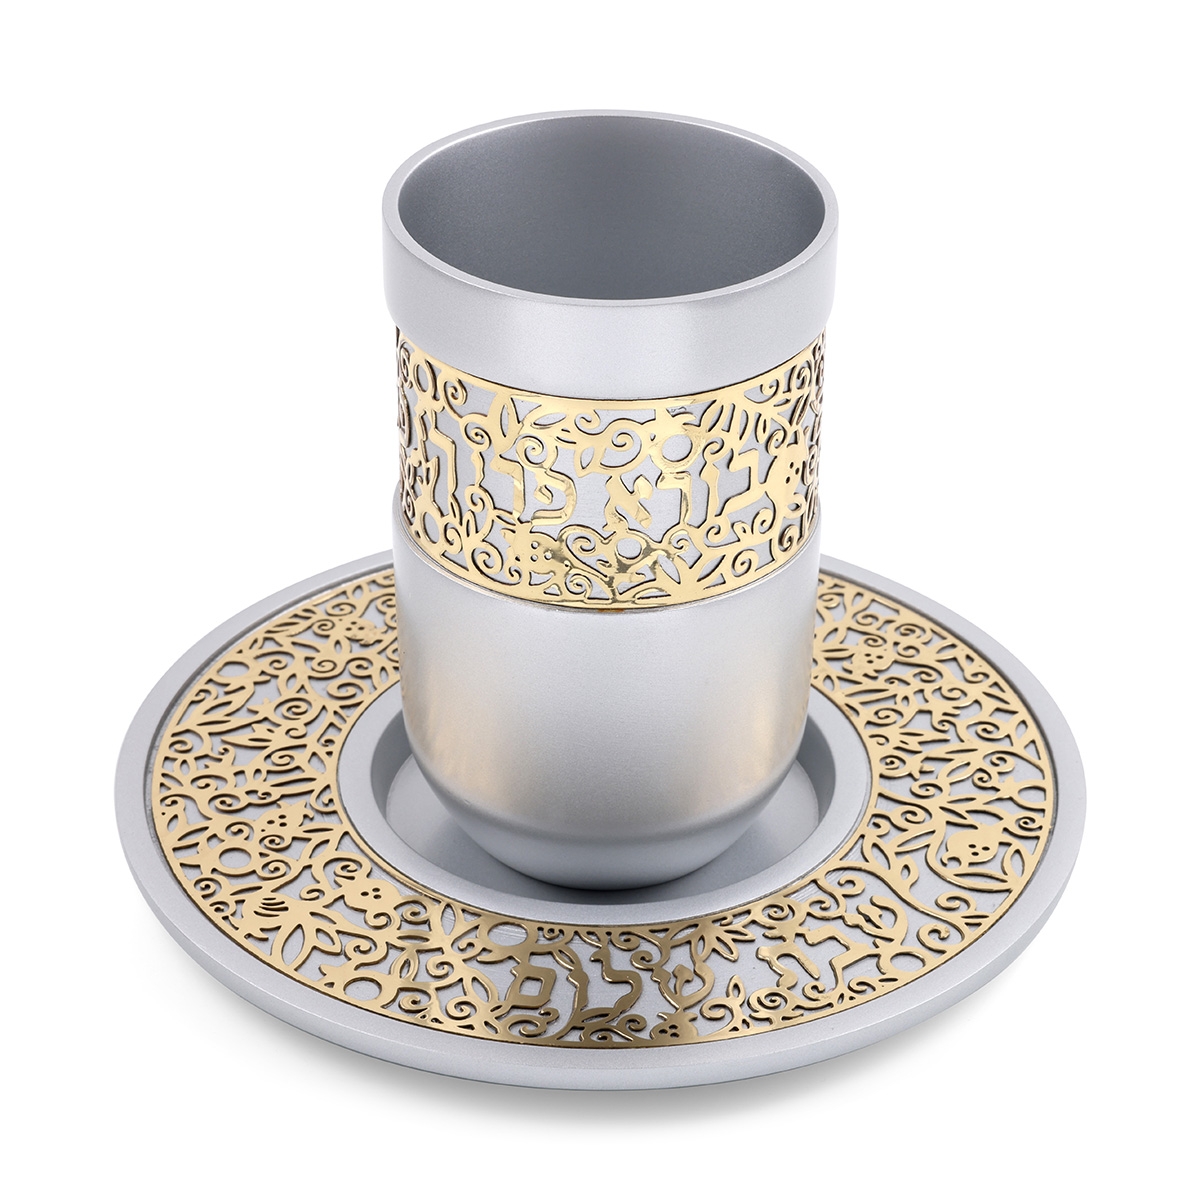 Yair Emanuel Shabbat Blessing Kiddush Cup with Saucer  - 1